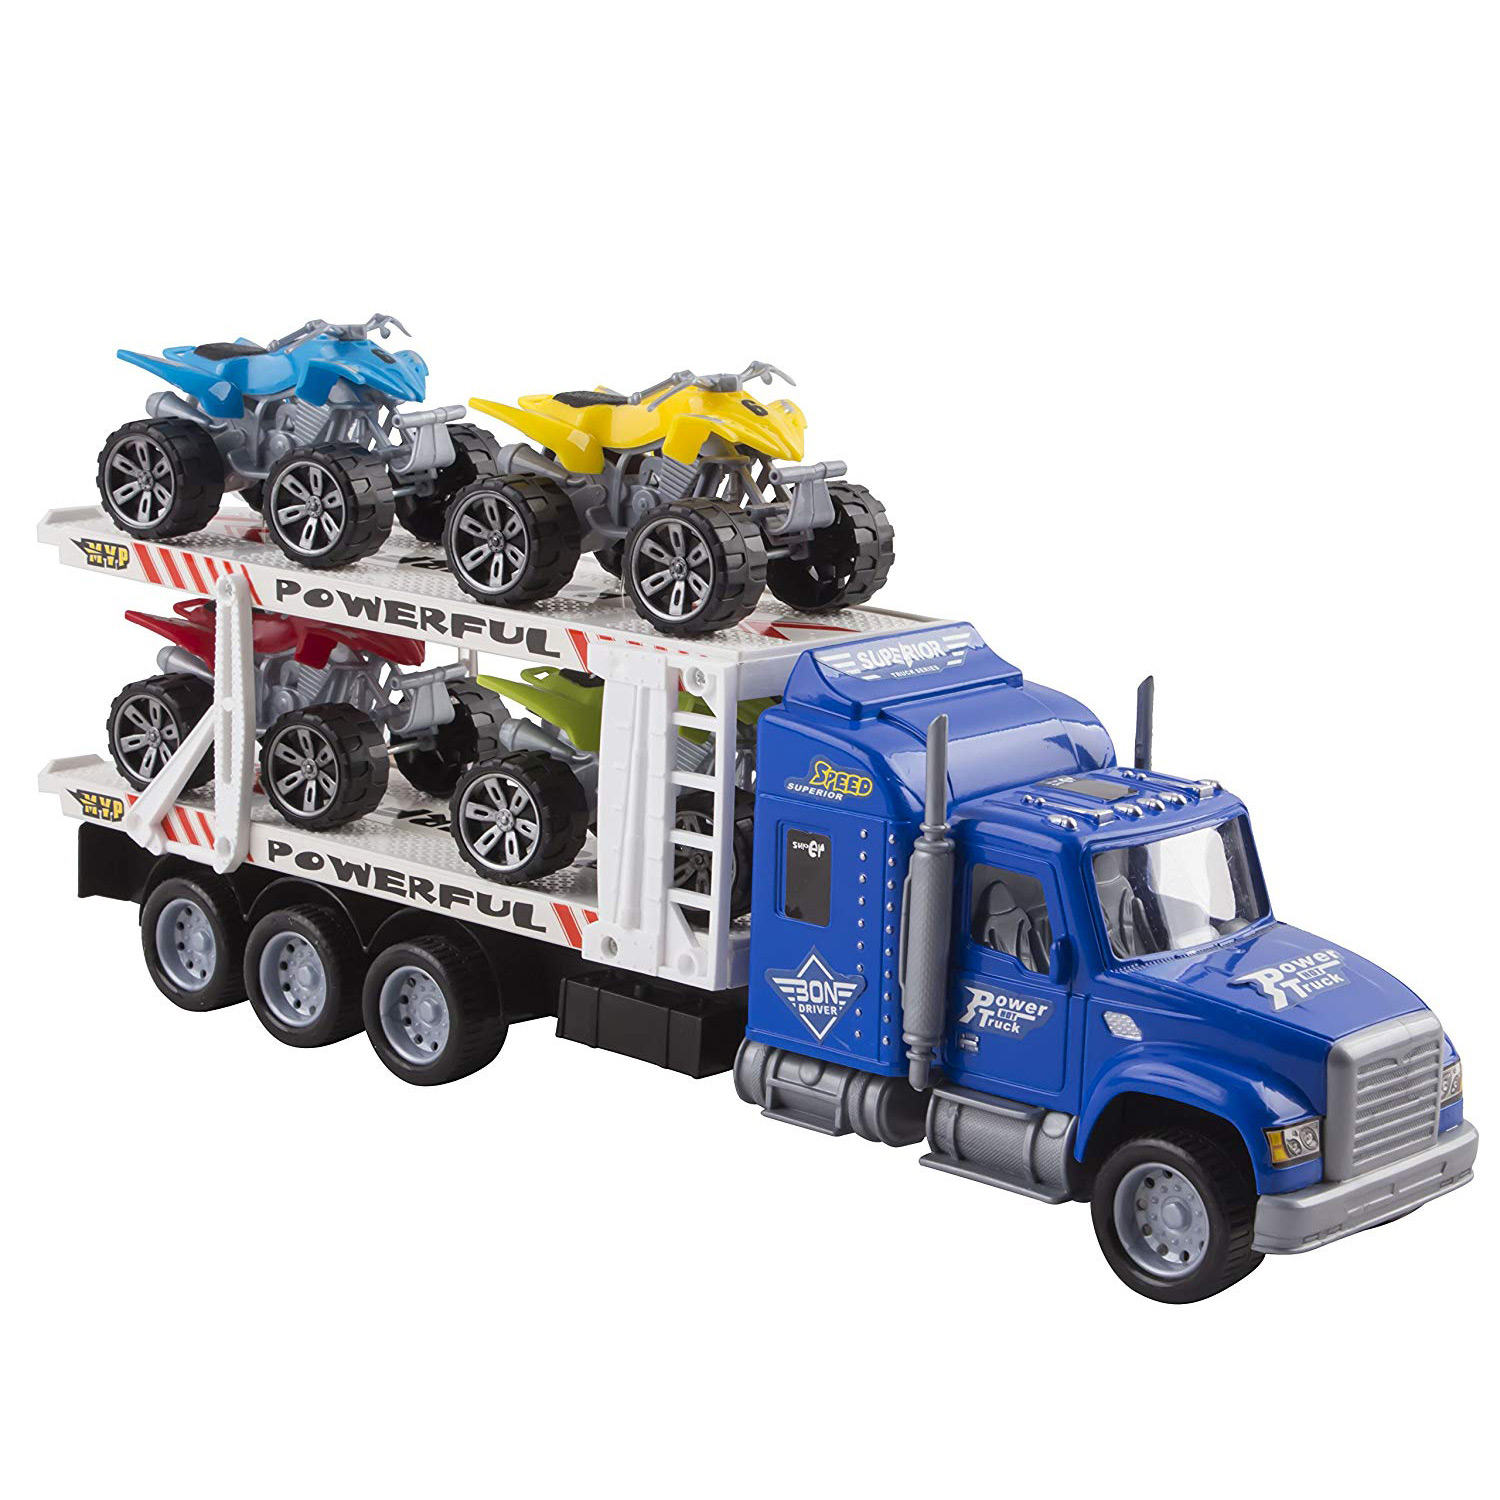 Toy Truck Transporter Trailer 14.5" Children’s Friction Big Rig With 4 ATV Toys No Batteries Or Assembly Required Perfect Semi Truck For Kids (Blue Truck)